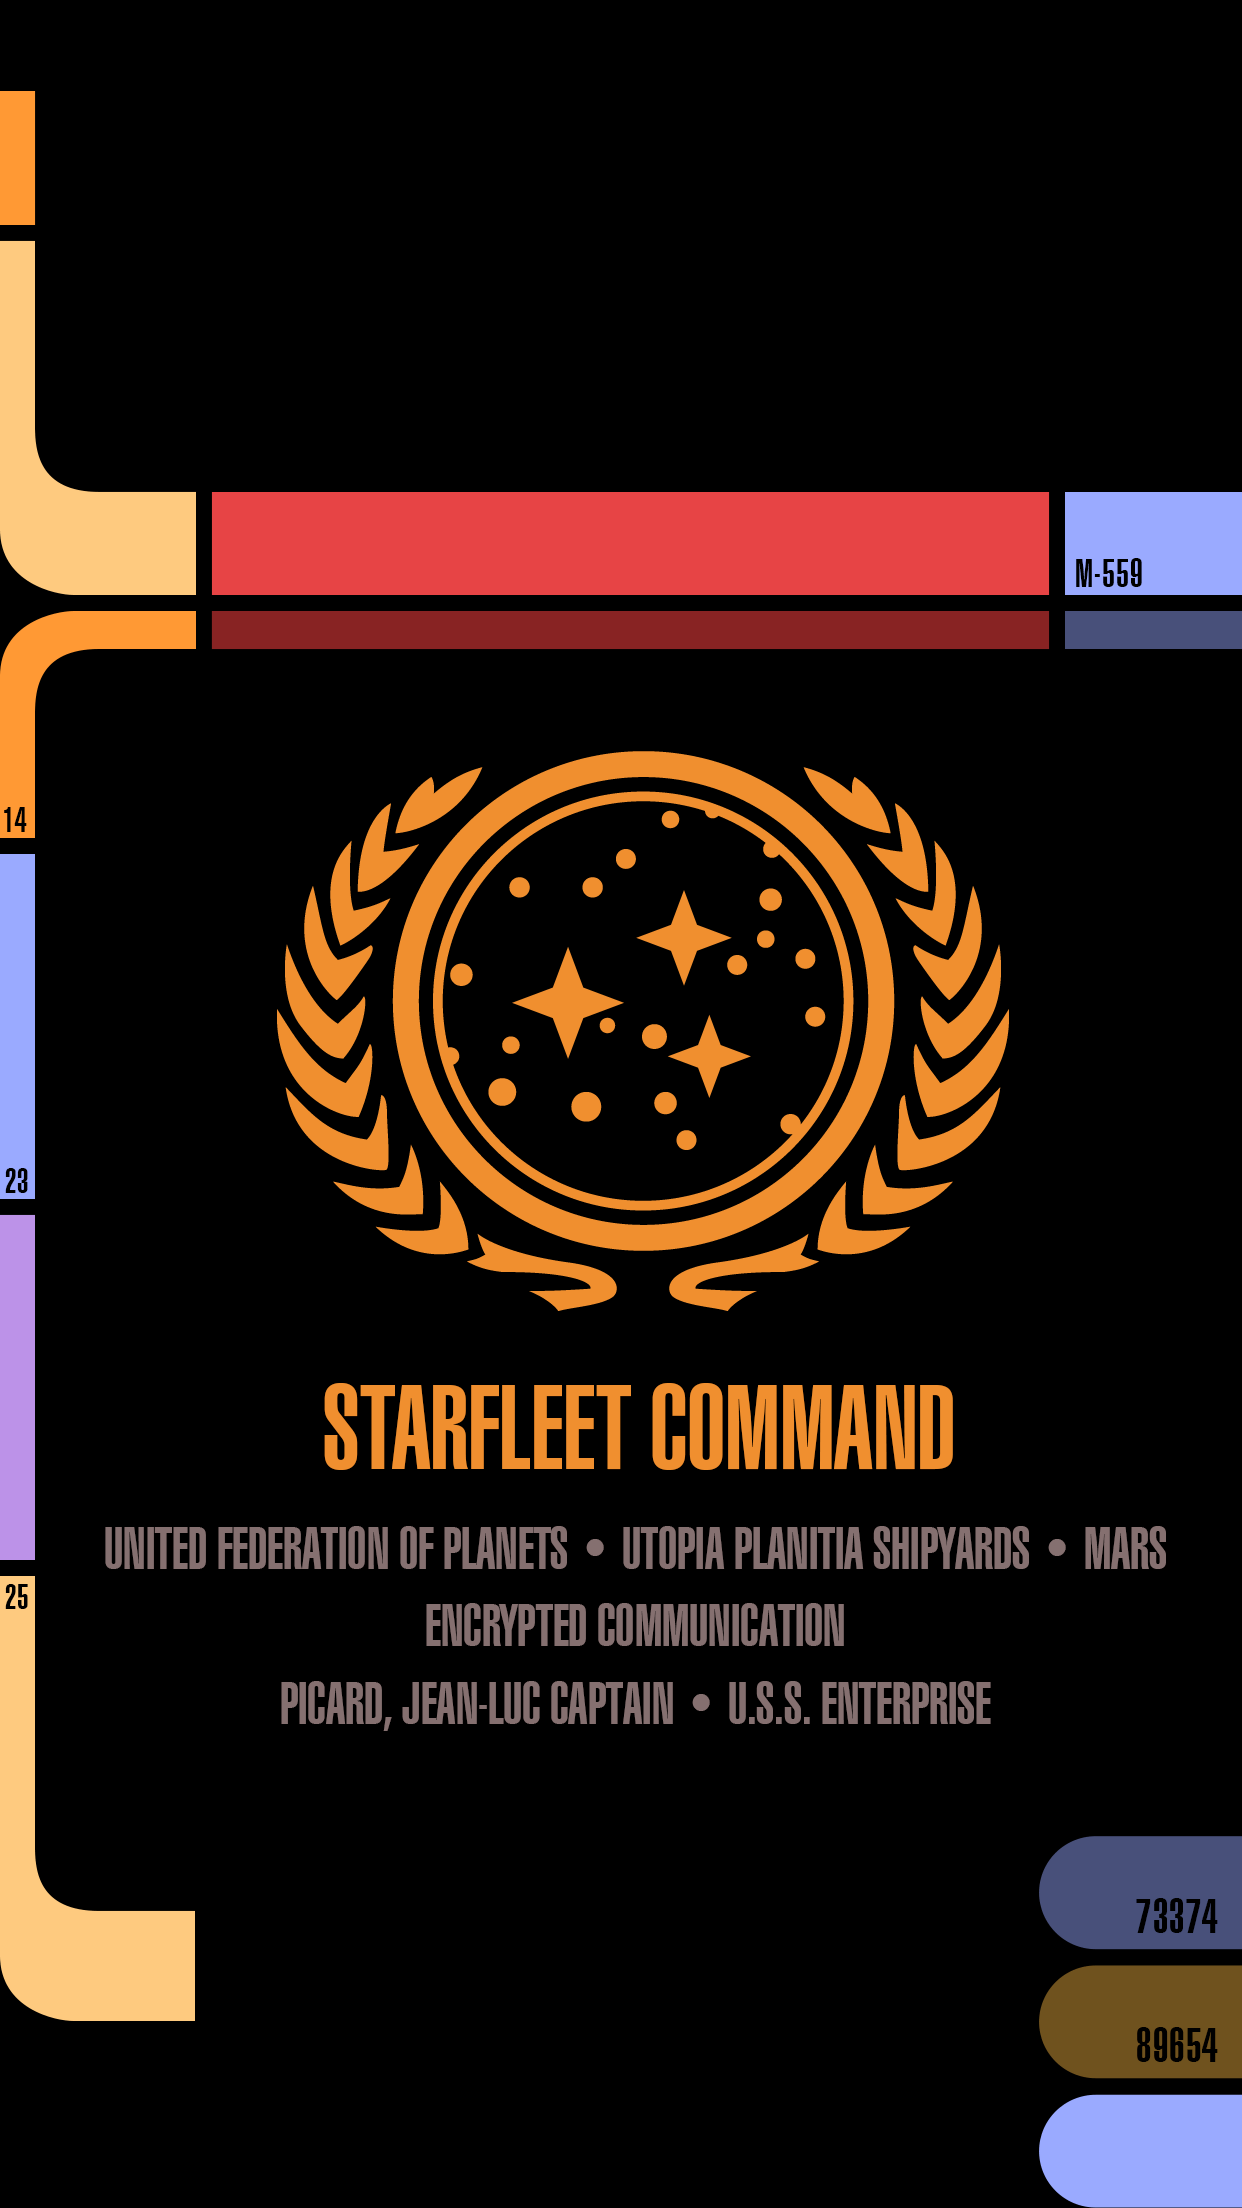 A black background with a red and orange gradient on the top. The Starfleet Command logo is in the center. The bottom has the name of the series and episode. - Star Trek